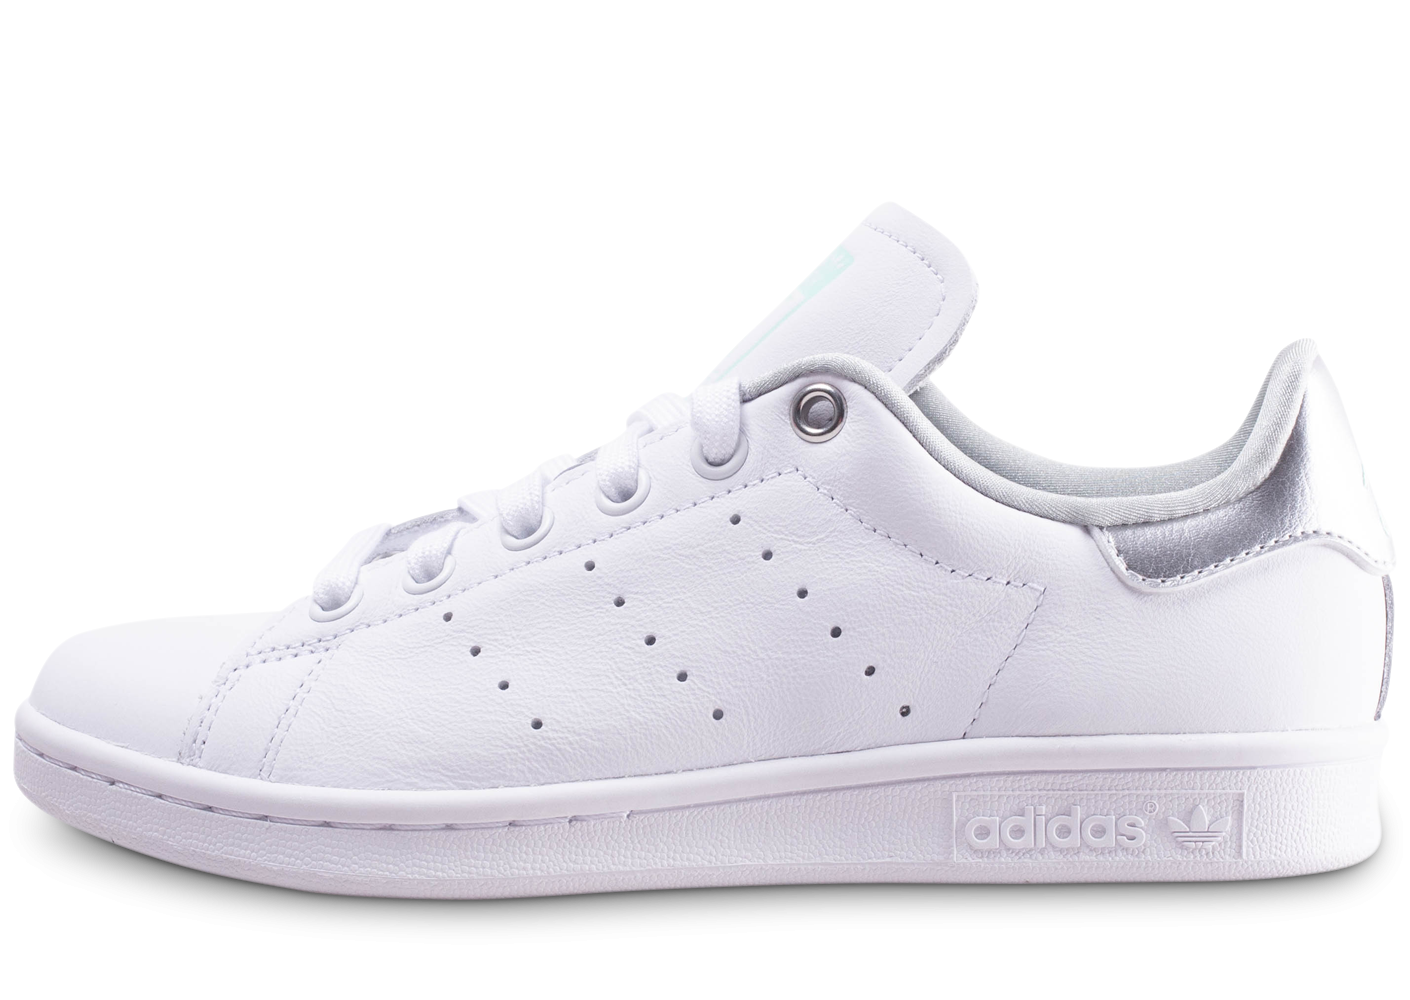 chaussures adidas stan smith femme blanche